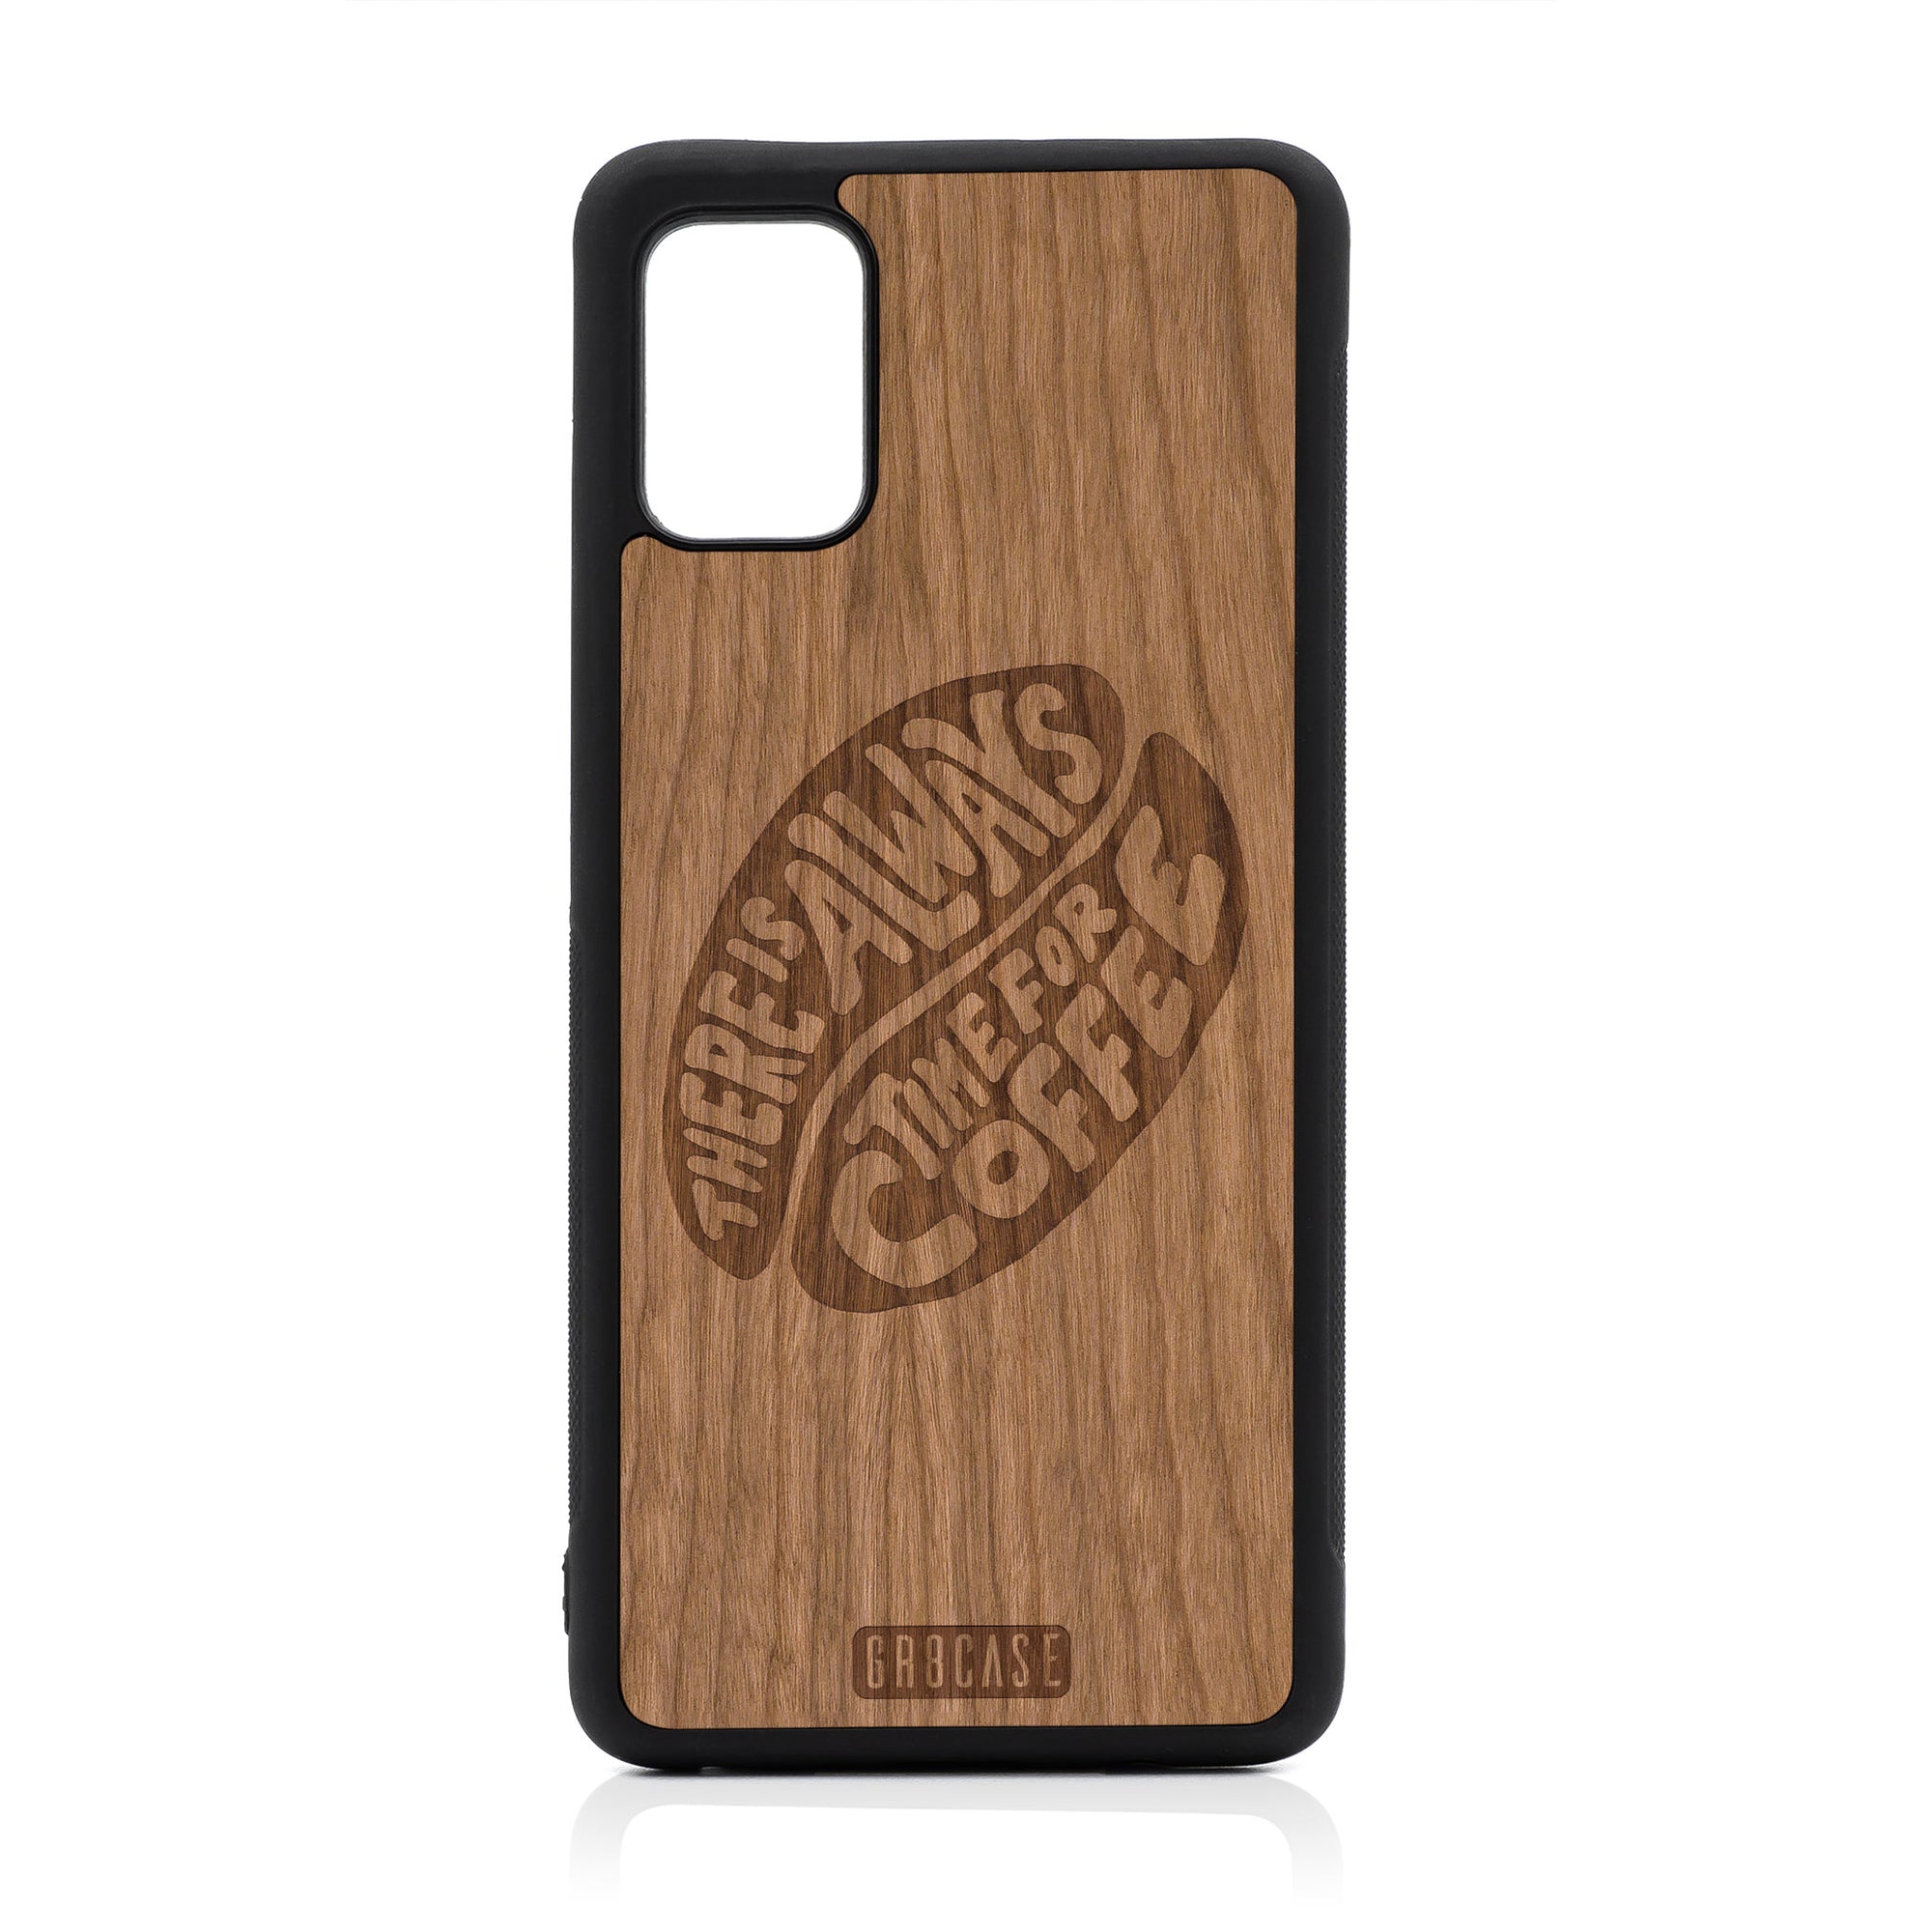 There Is Always Time For Coffee Design Wood Case For Samsung Galaxy A51